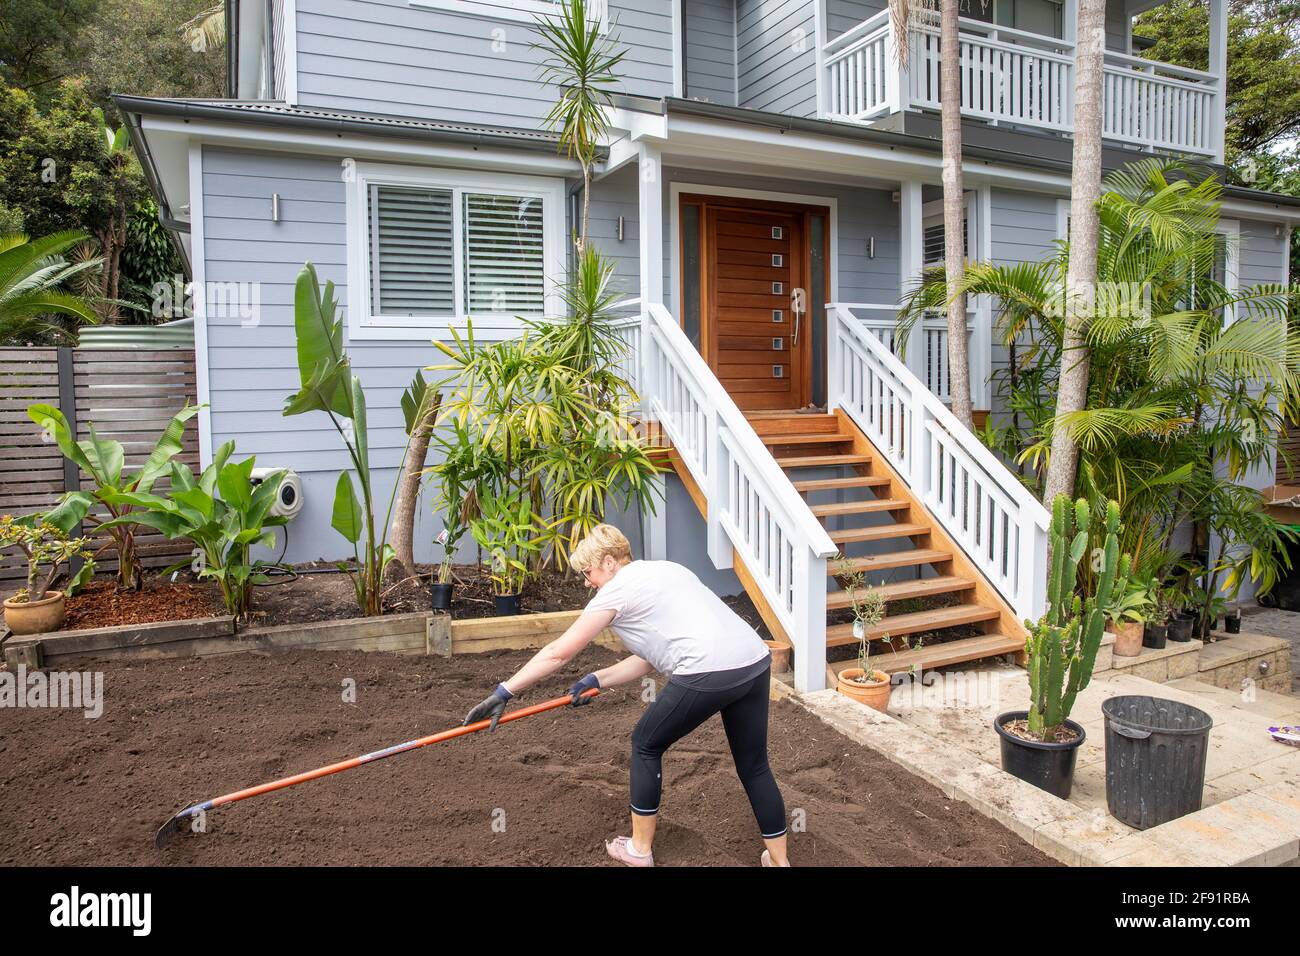 Australian woman model released working on the garden at home raking soil to prepare for new turf to be laid,Sydney,NSW,Australia Stock Photo